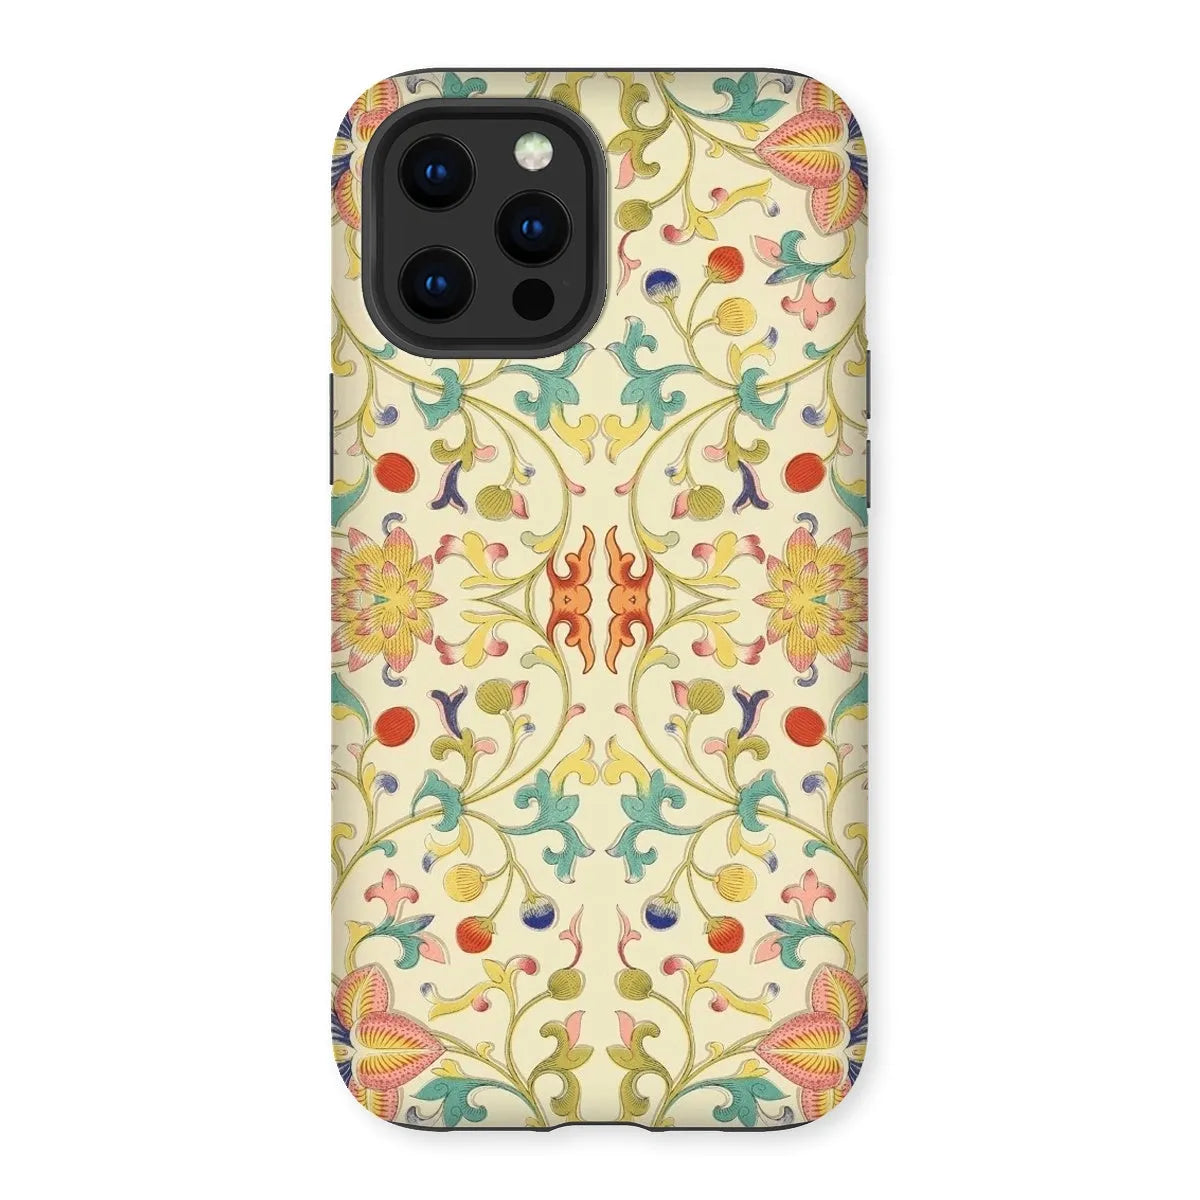 Over The Rainbow - Chinoiserie Pattern Art Phone Case - Iphone 12 Pro Max / Matte - Mobile Phone Cases - Aesthetic Art